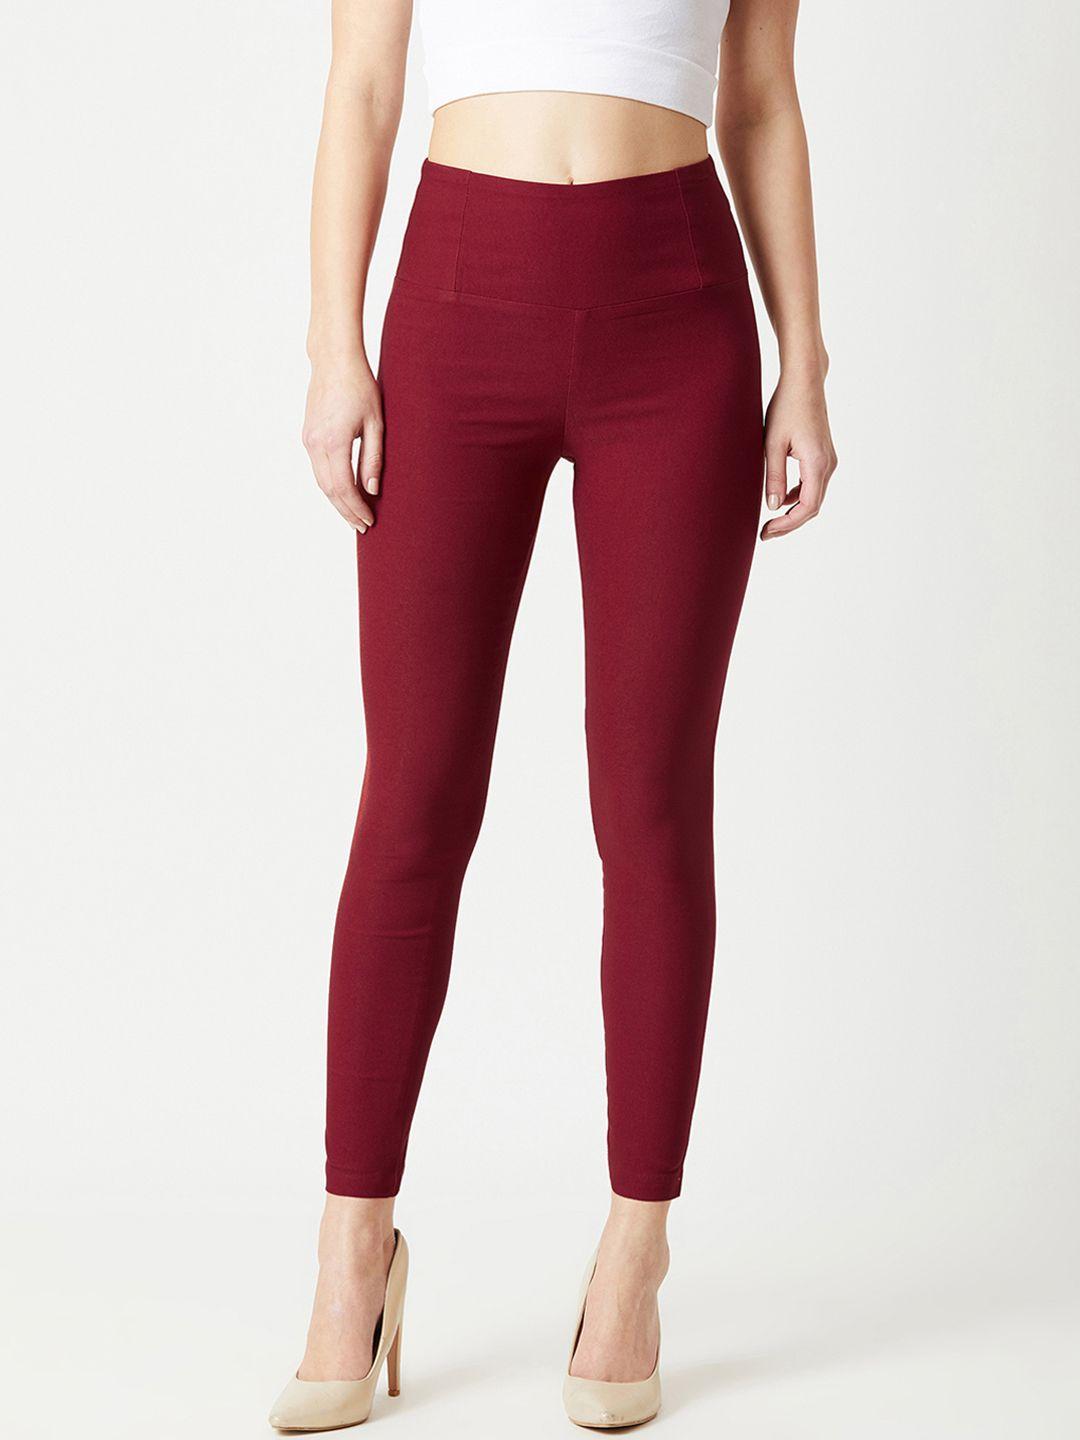 miss-chase-women-maroon-solid-skinny-fit-jeggings